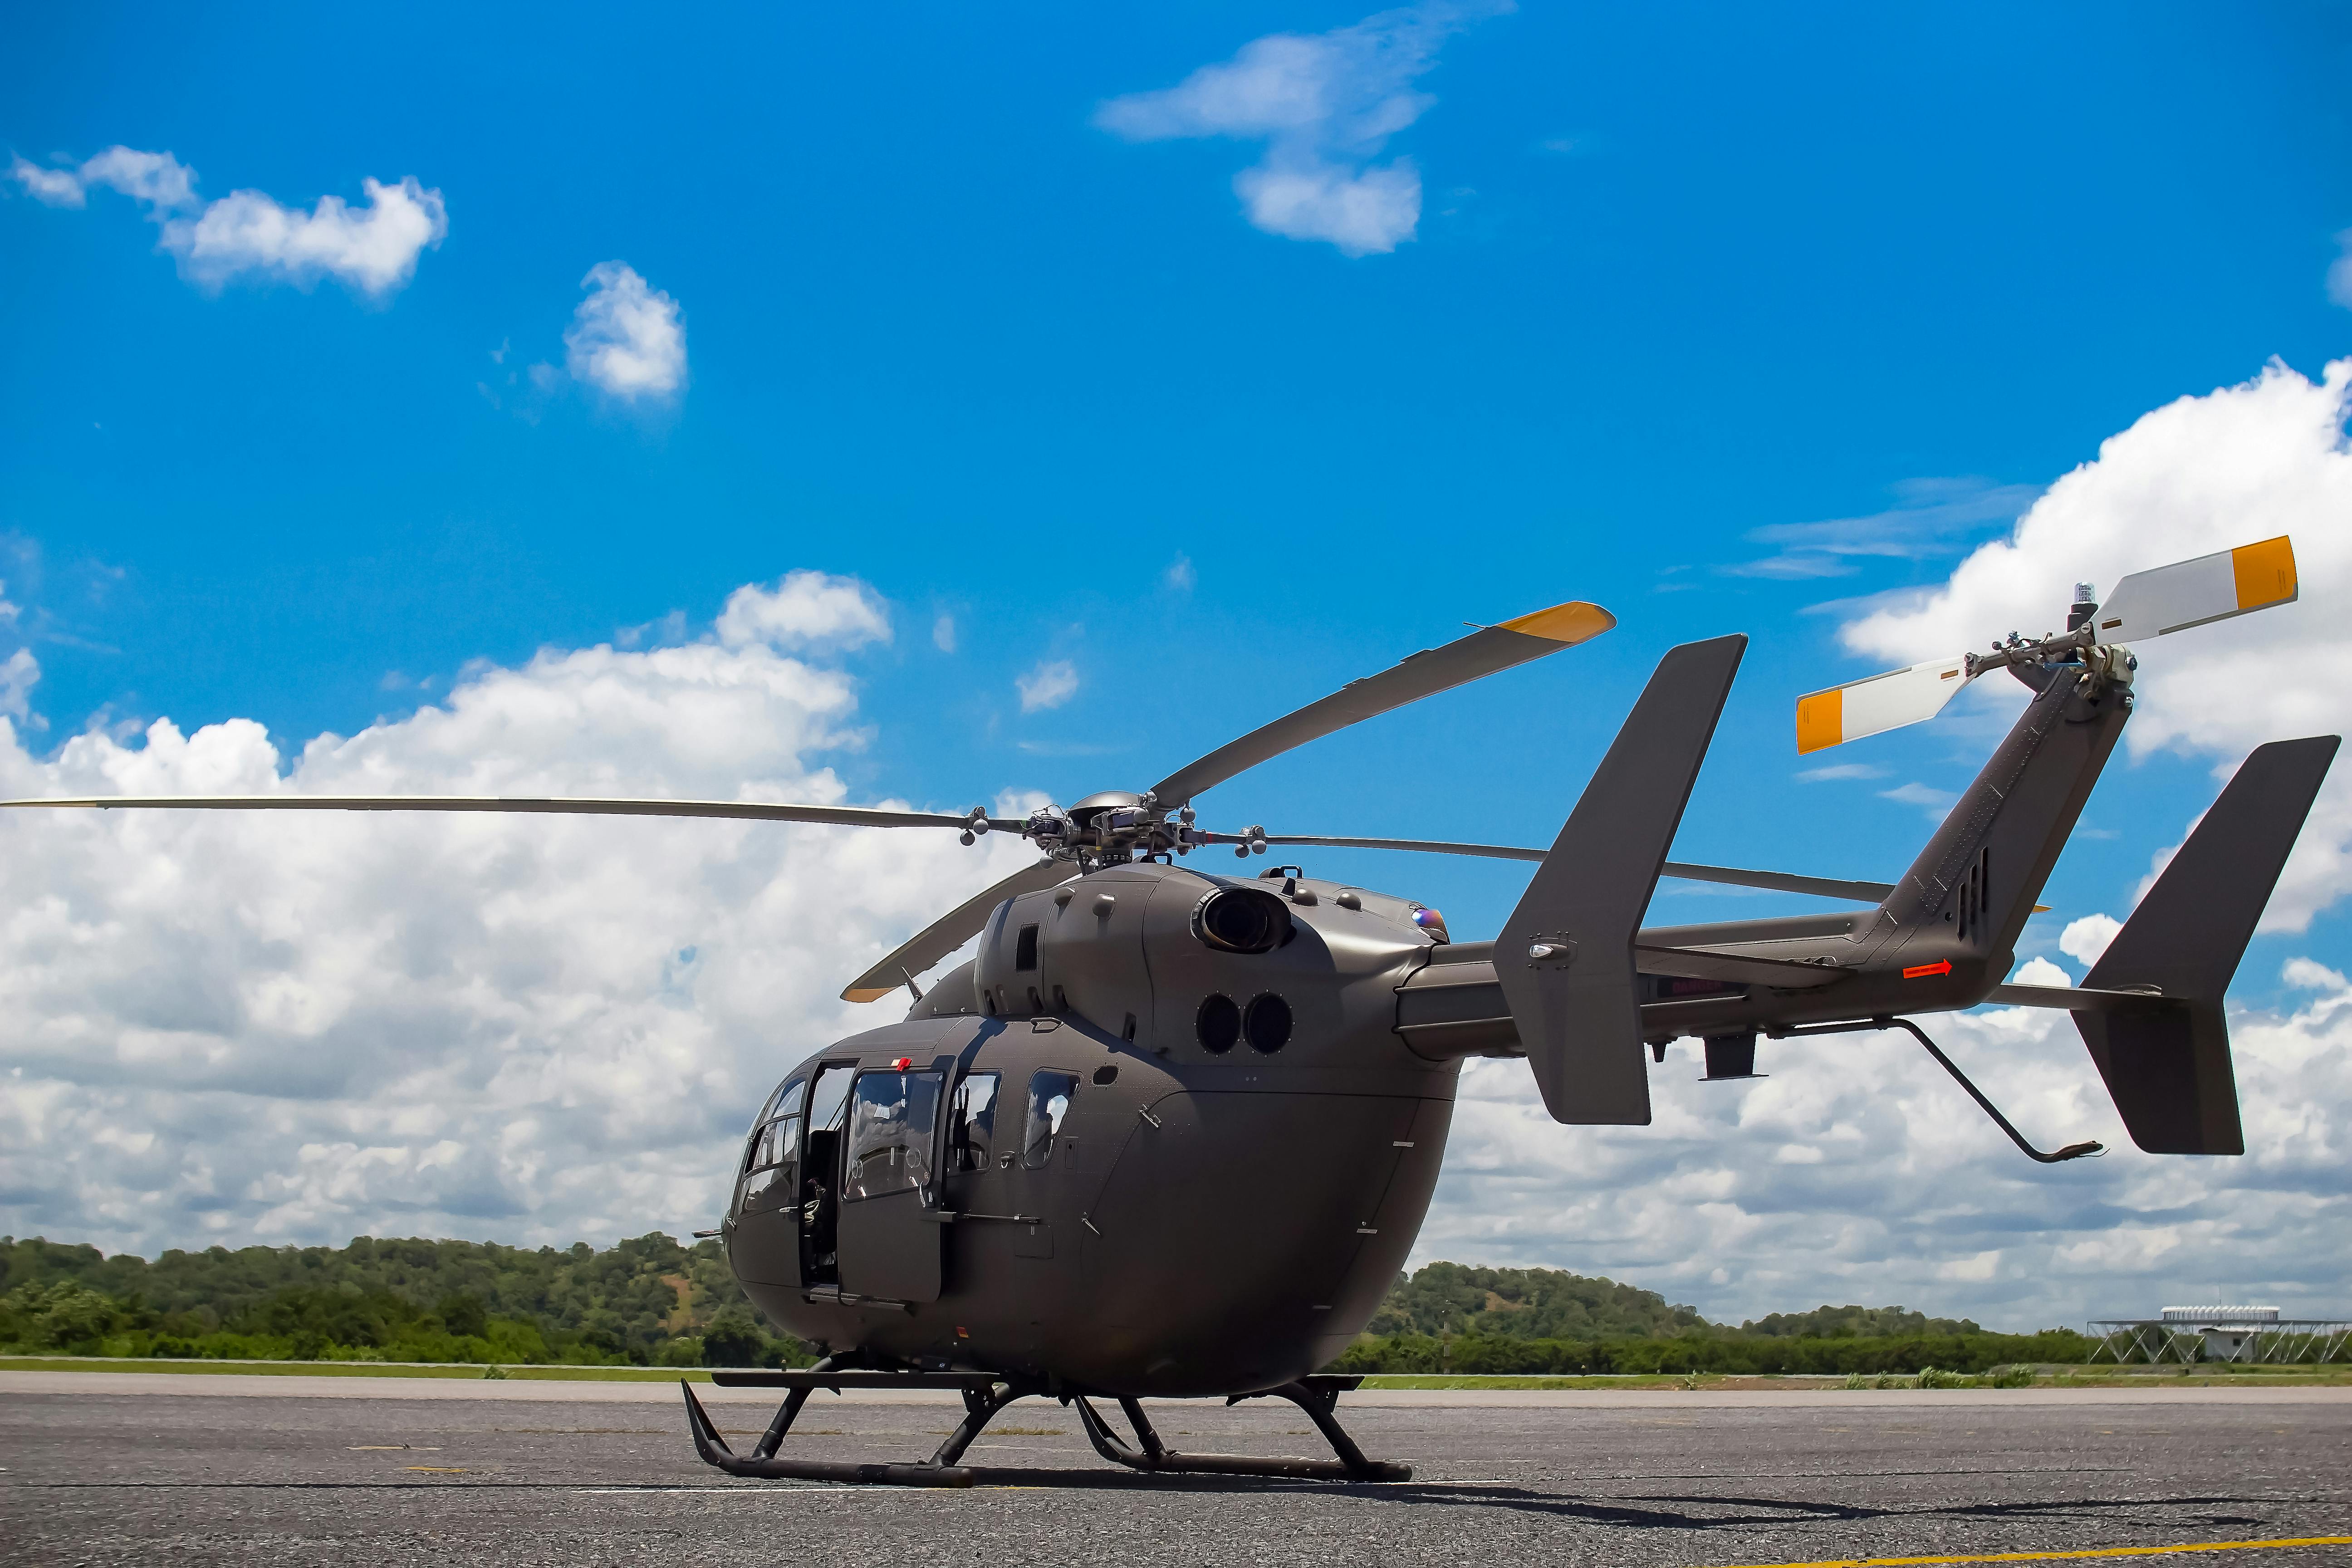 Gray Helicopter on Gray Concrete Pavement Under Blue Sky